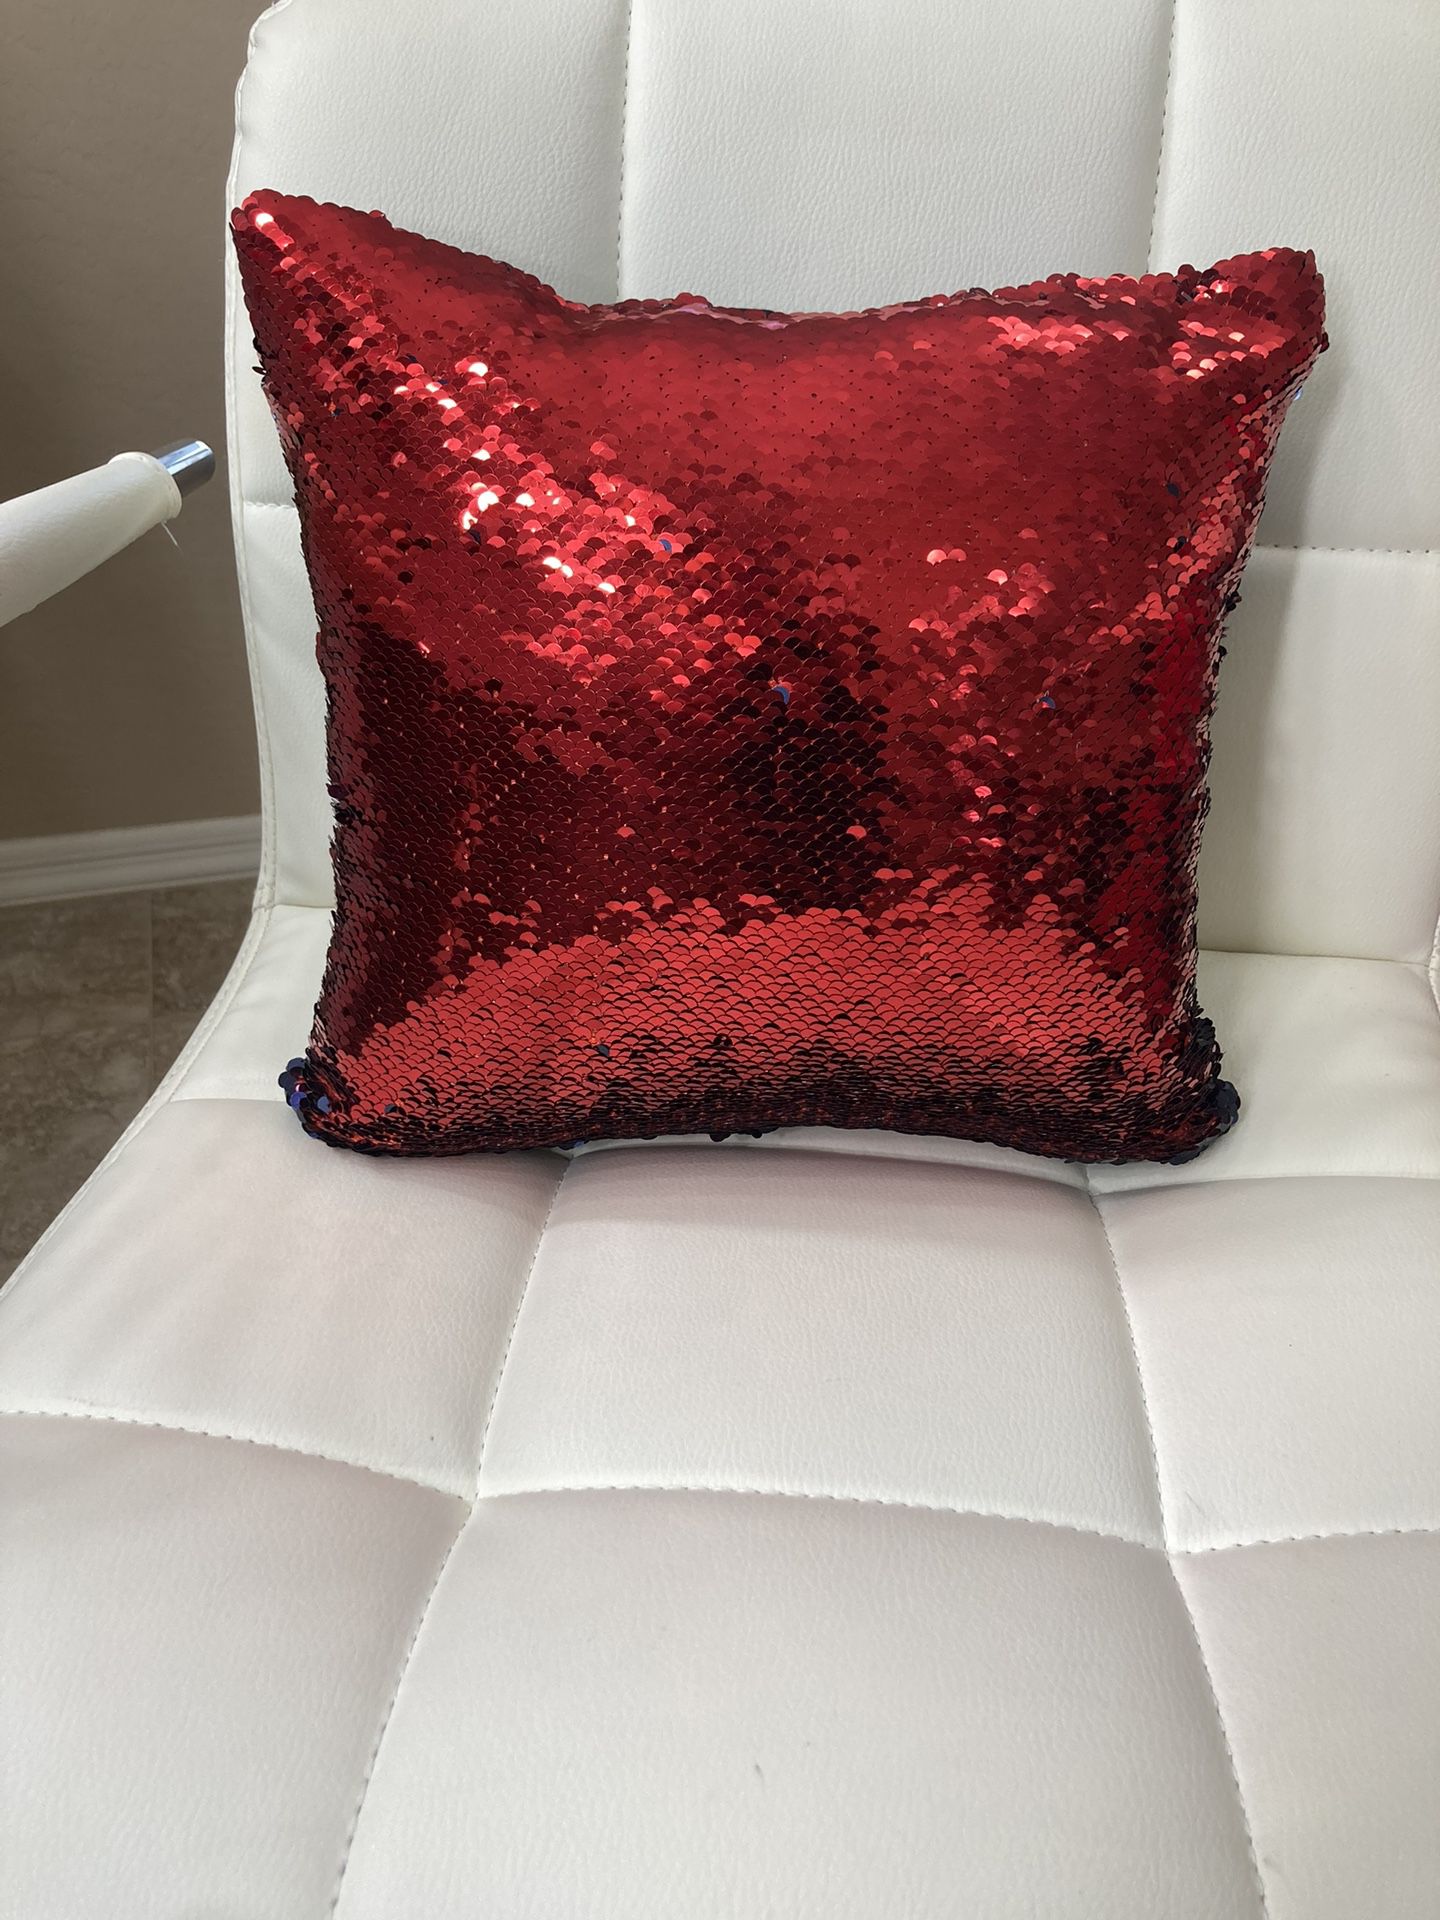 Small Red Cushion $5